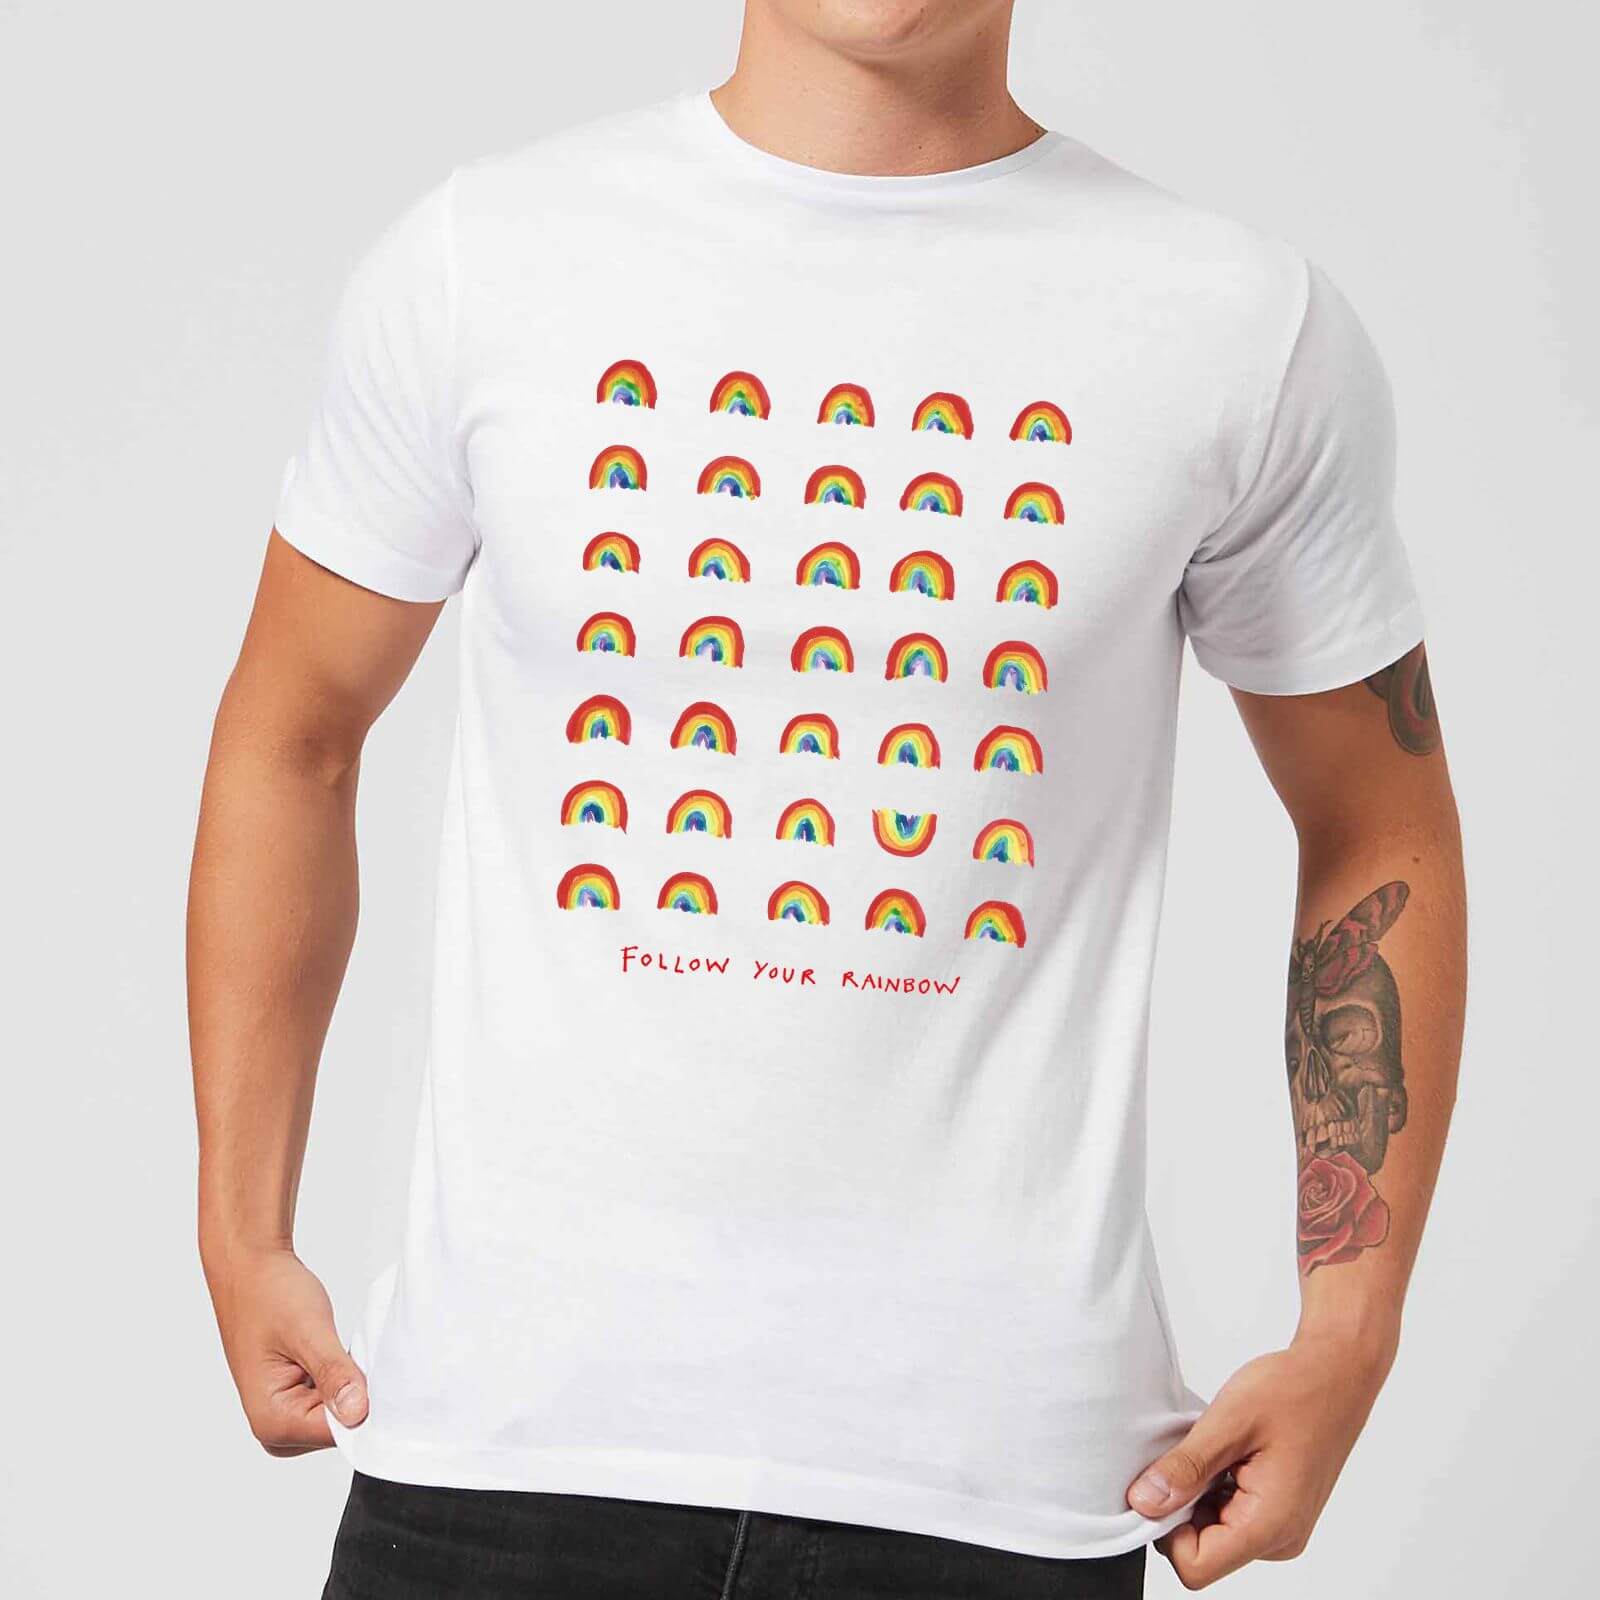 Poet and Painter Follow Your Rainbow Men's T-Shirt - White - S - White